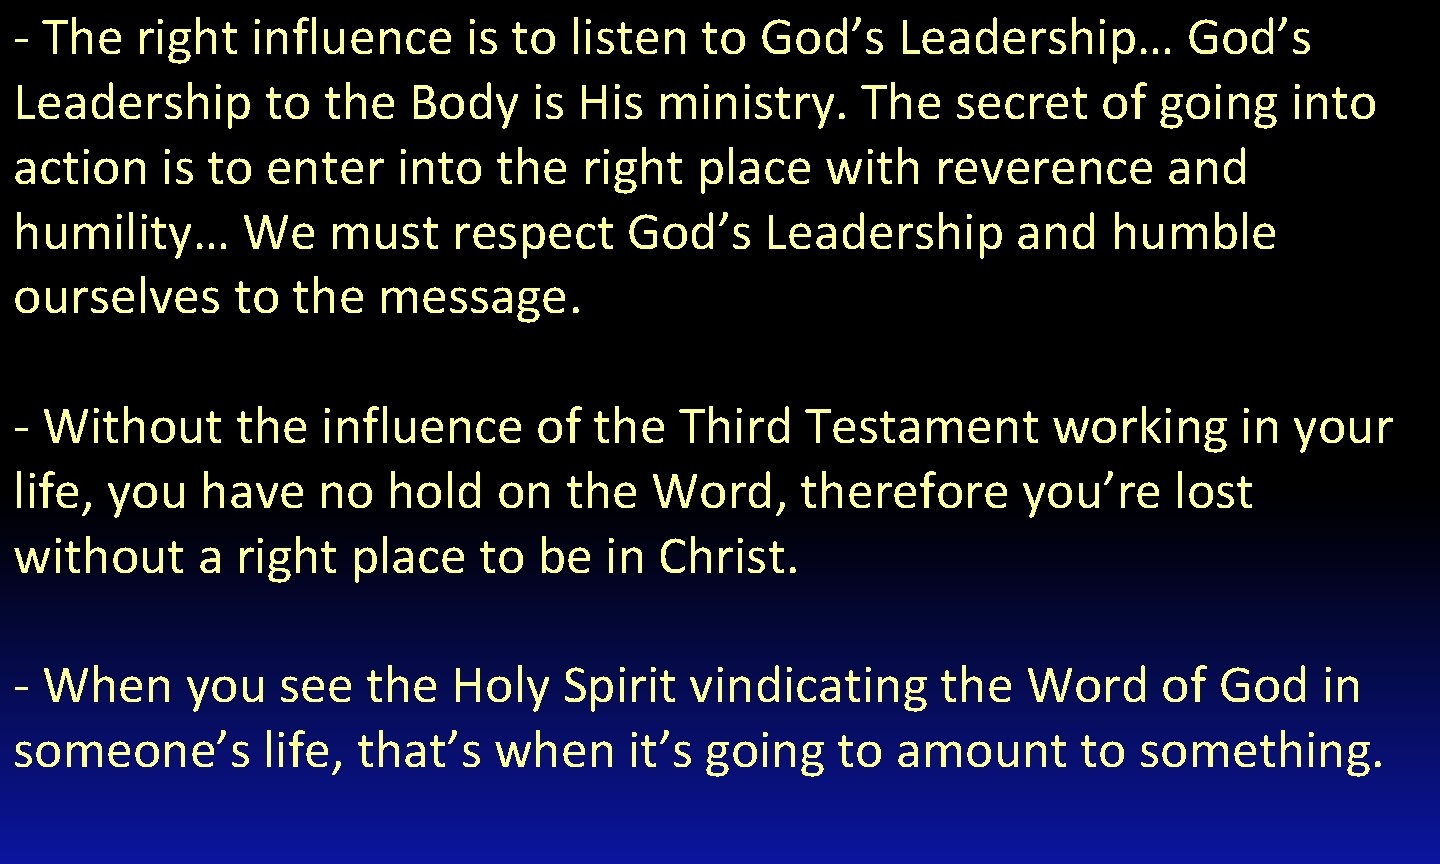 - The right influence is to listen to God’s Leadership… God’s Leadership to the